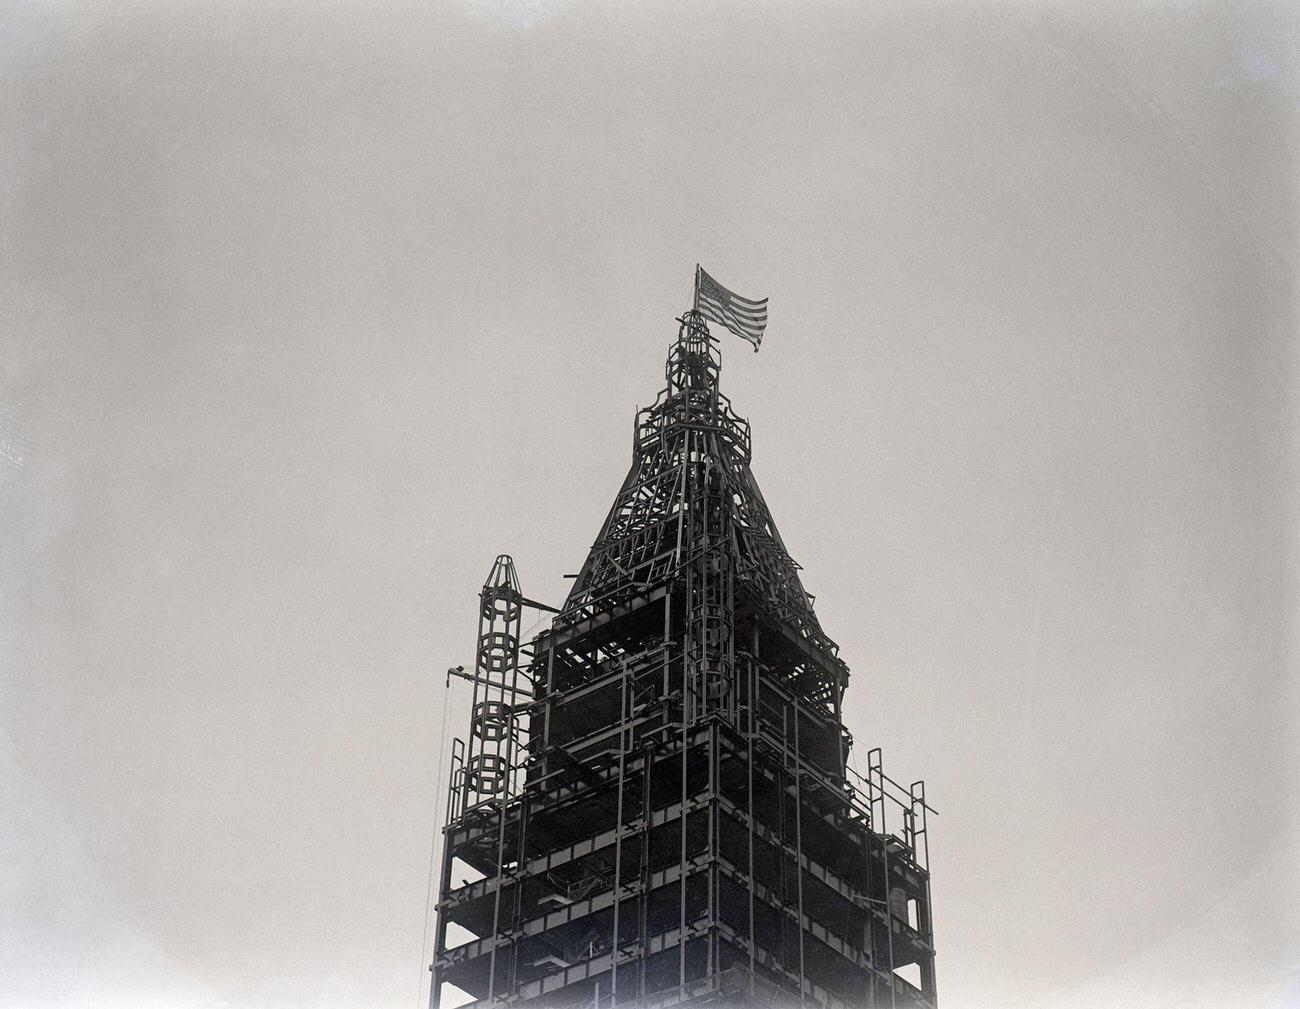 Woolworth Building Construction. Flag Showing Completion Of Iron Structure Framework, 1912